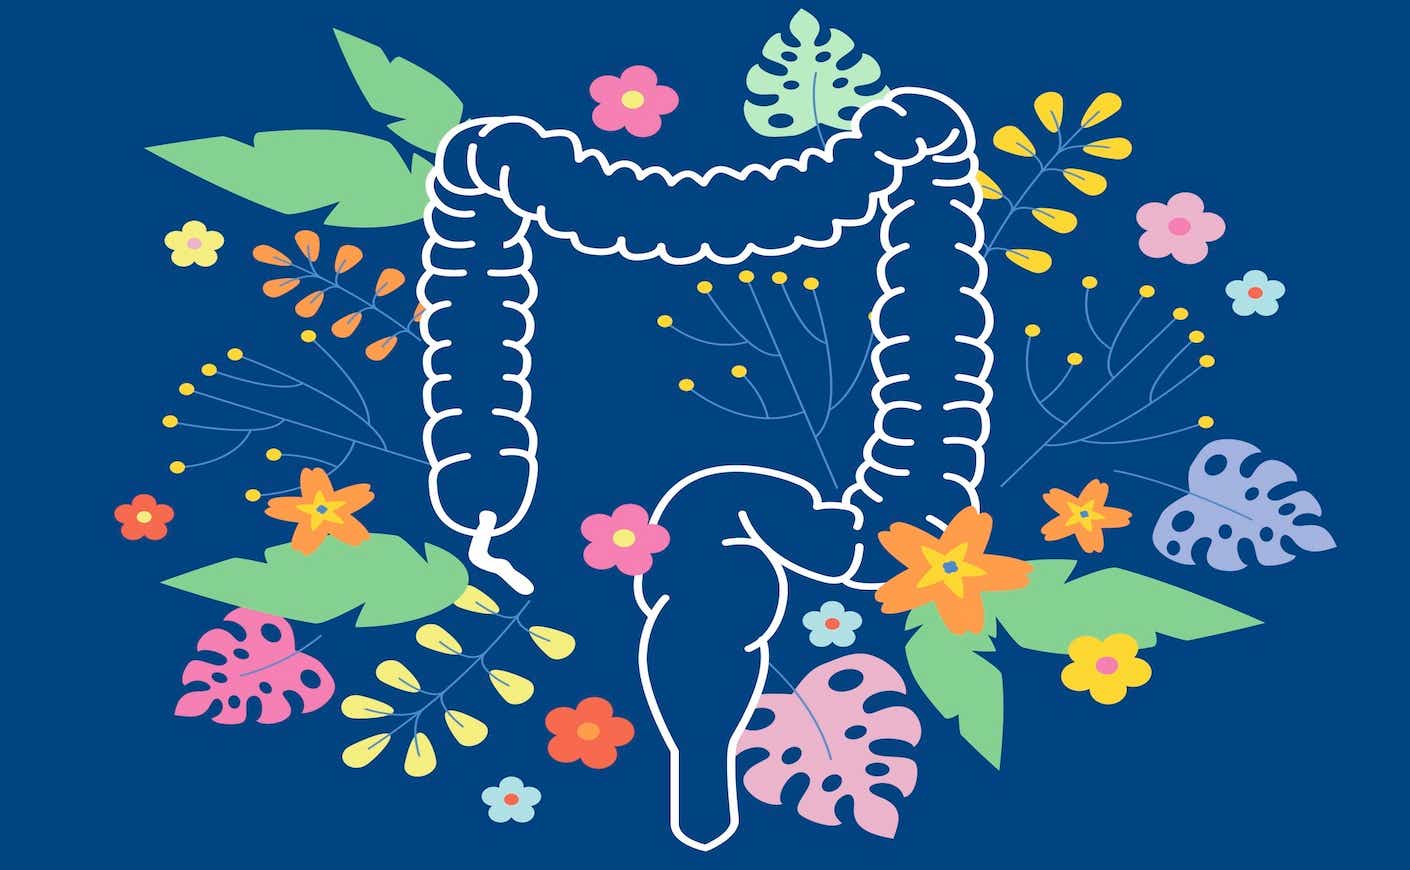 an illustration of a colon surrounded by flowers